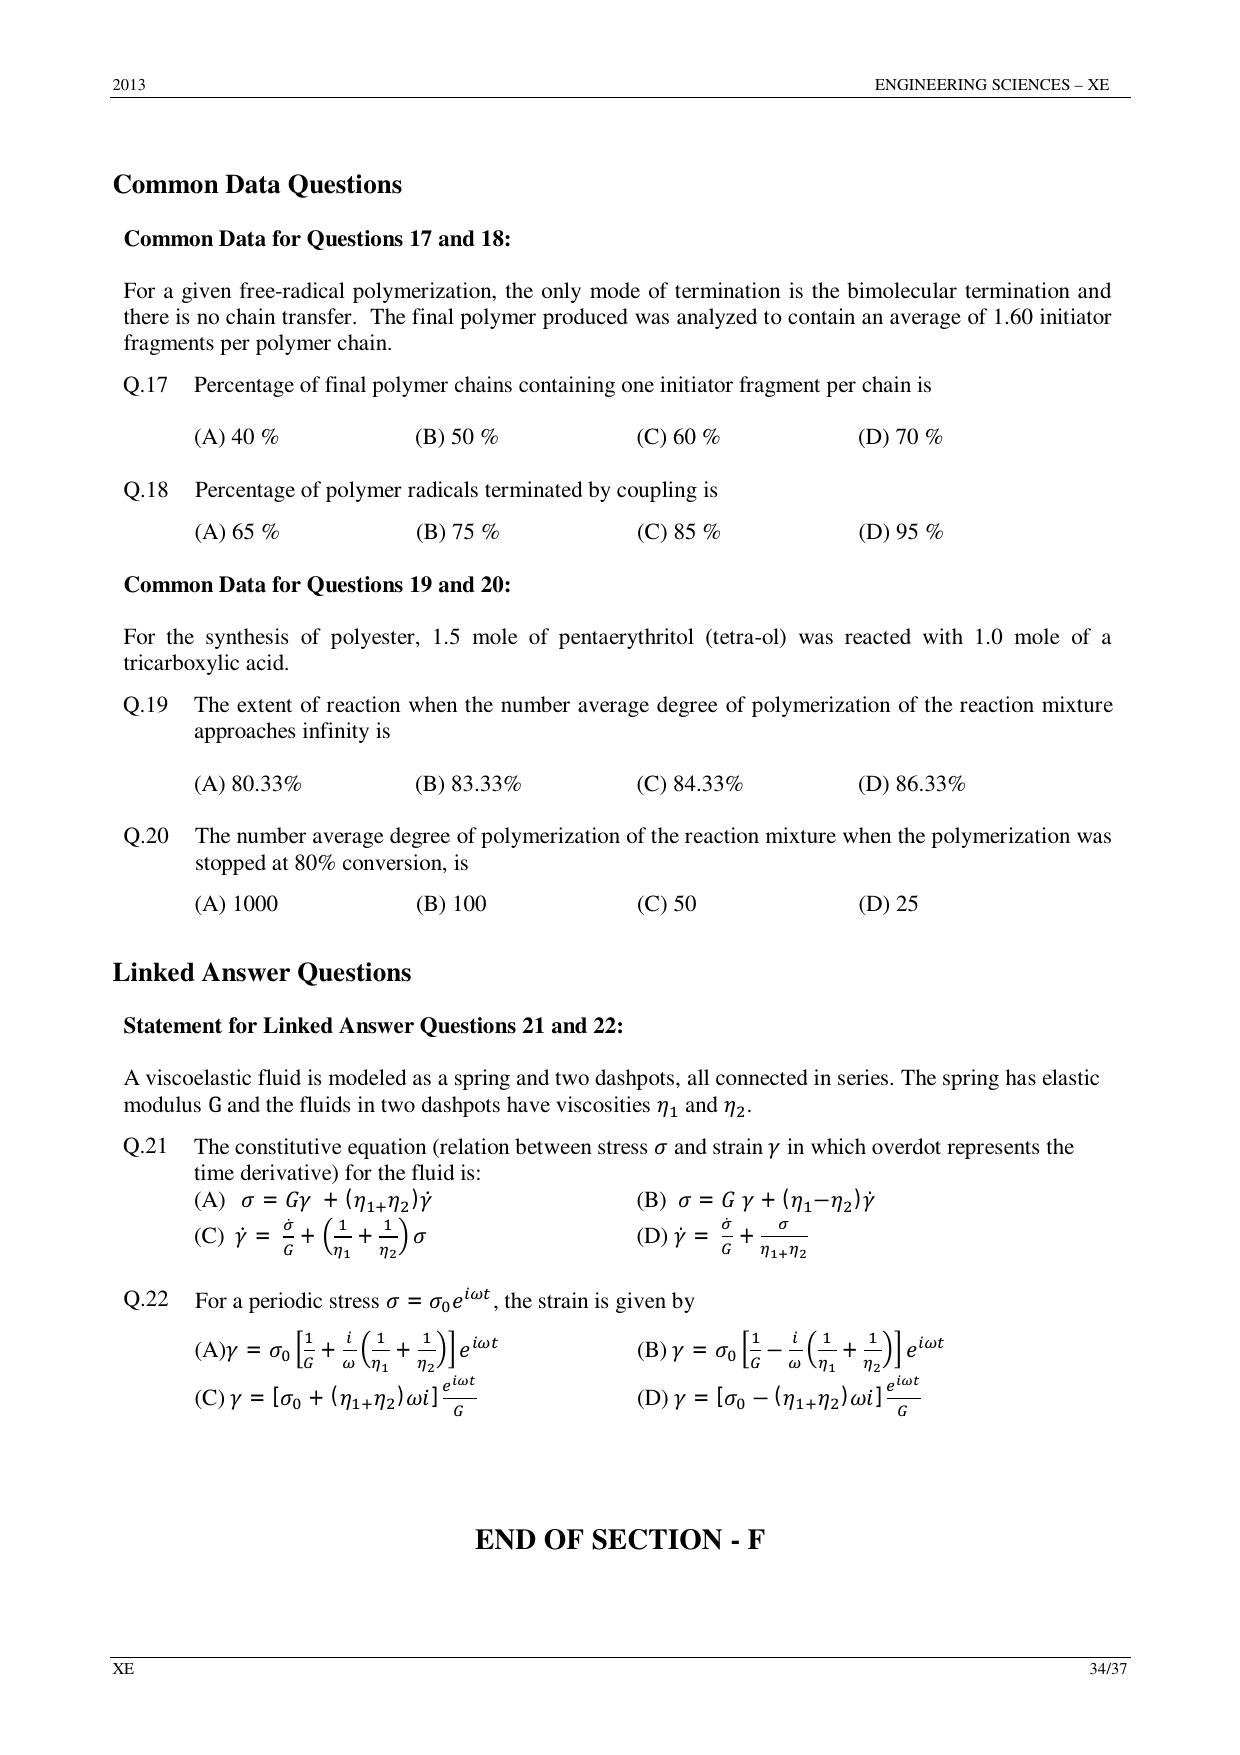 GATE 2013 Engineering Sciences (XE) Question Paper with Answer Key - Page 34